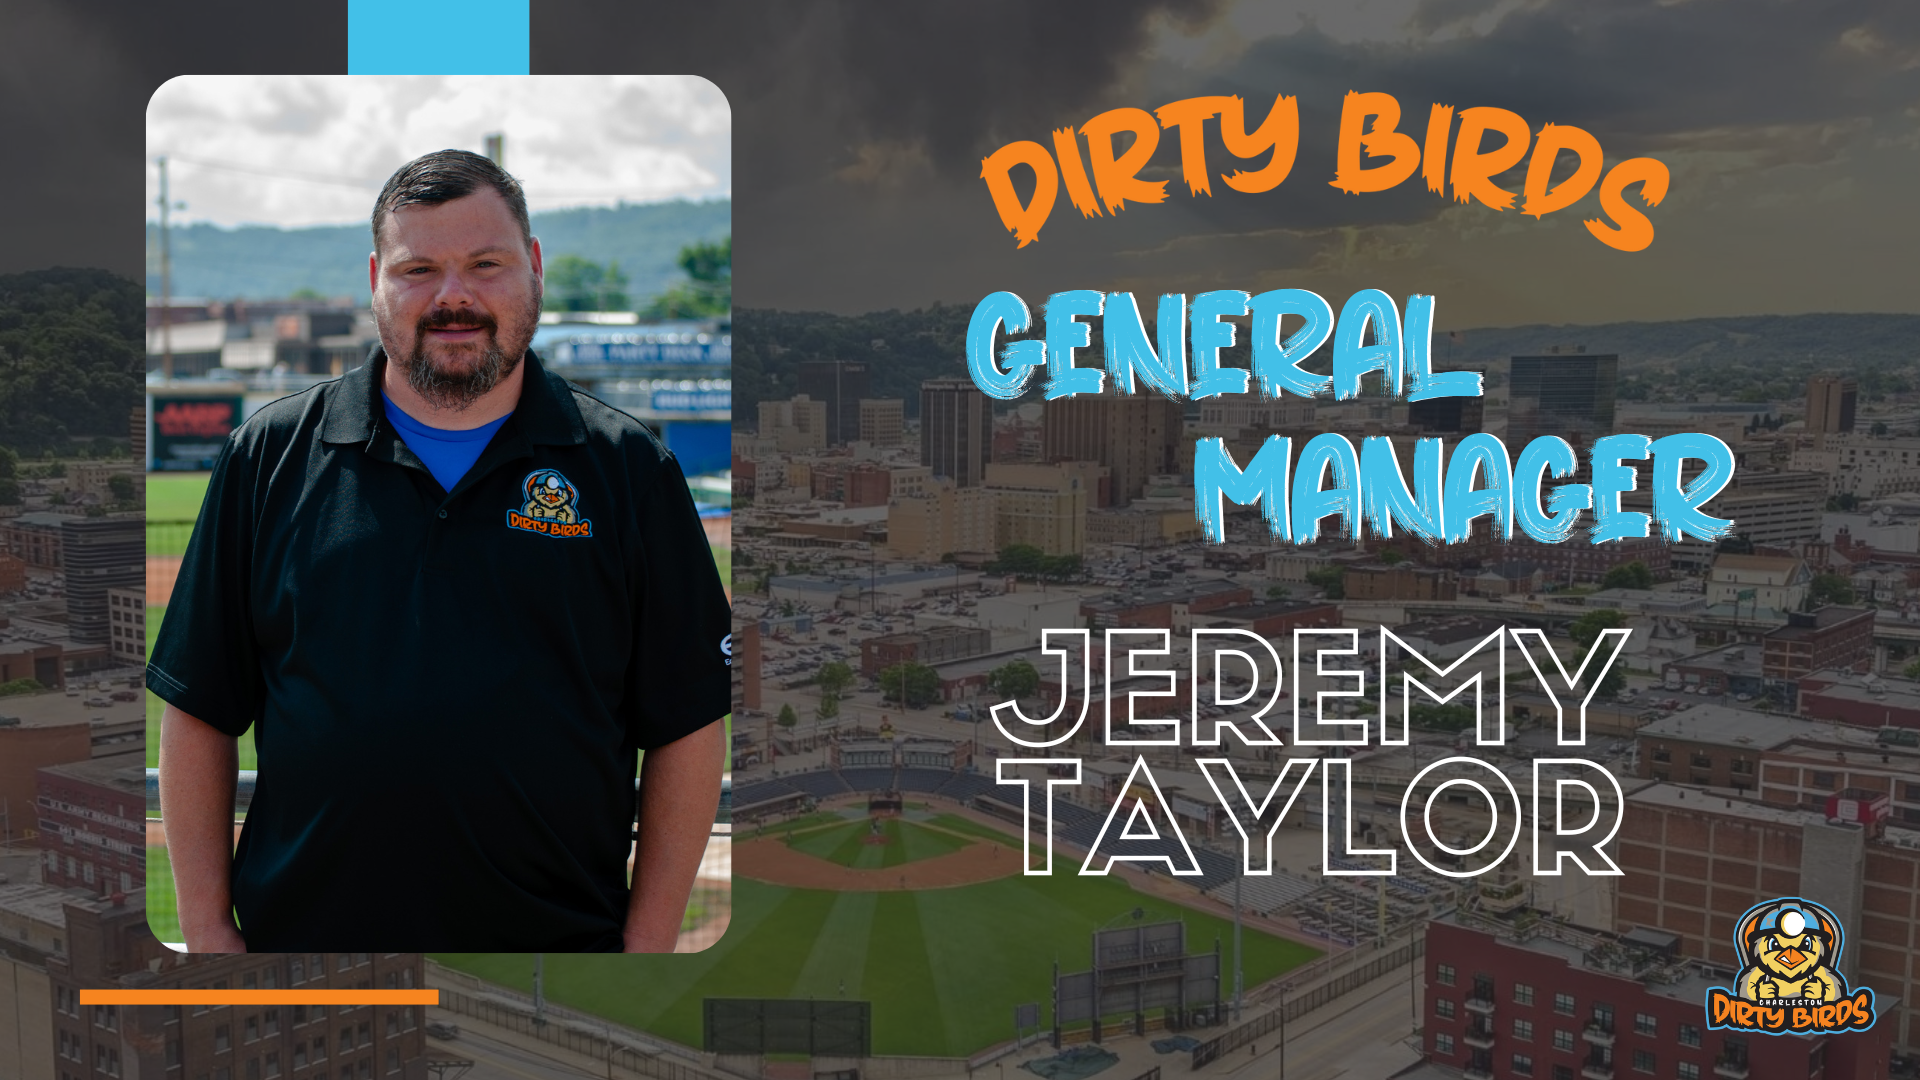 Jeremy Taylor Named Dirty Birds' General Manager